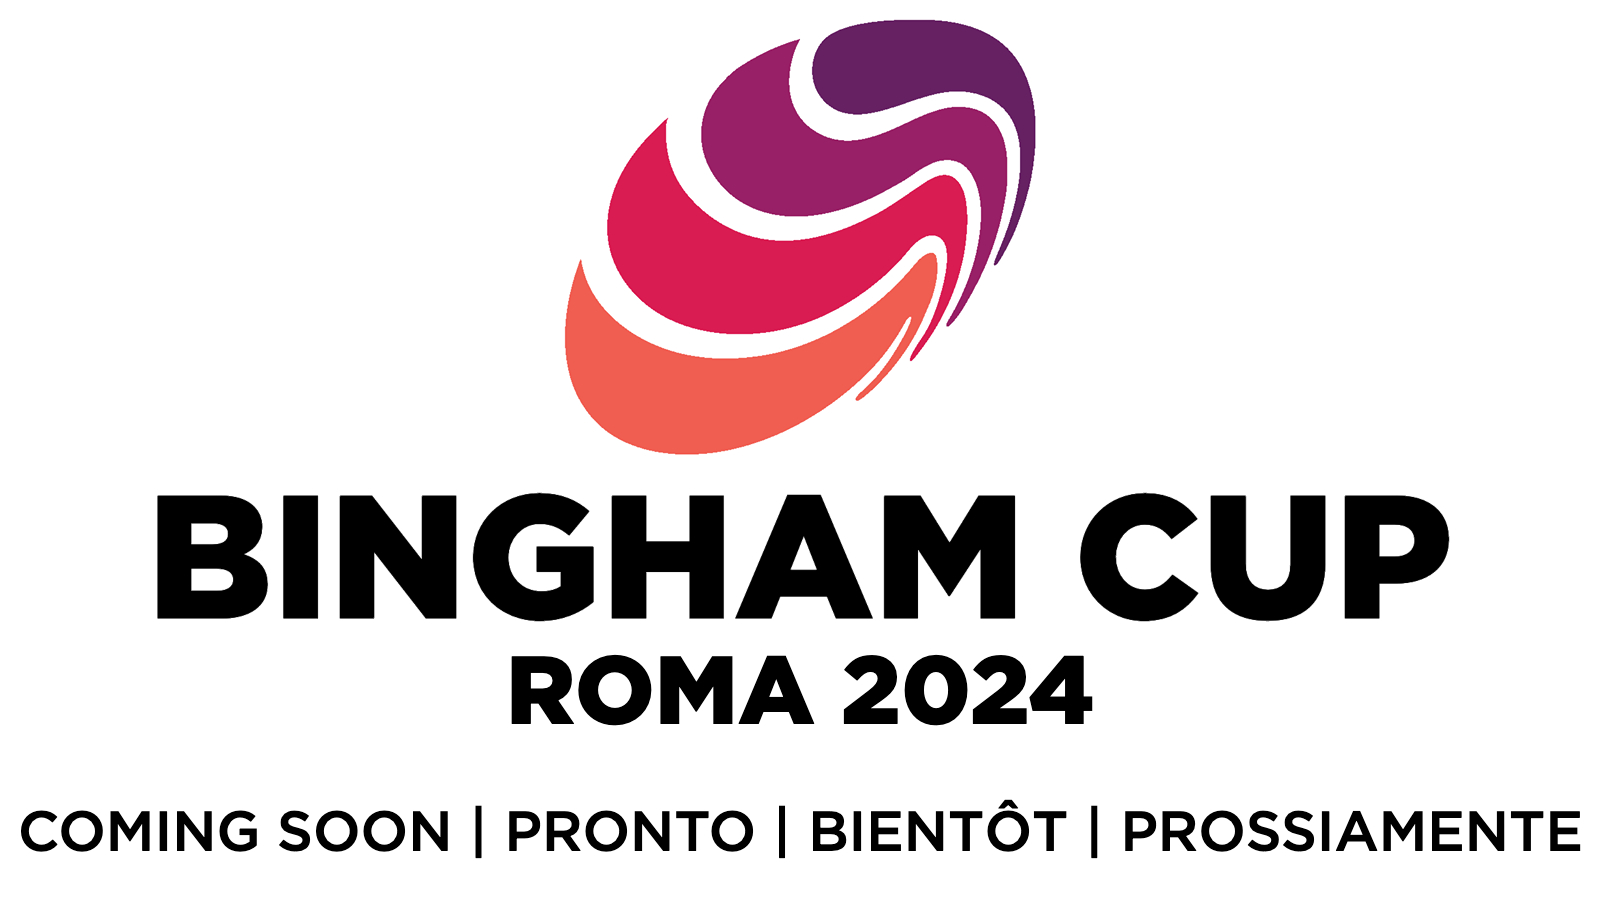 Bingham Cup – Rome 2024: LGBT+ rugby tournament